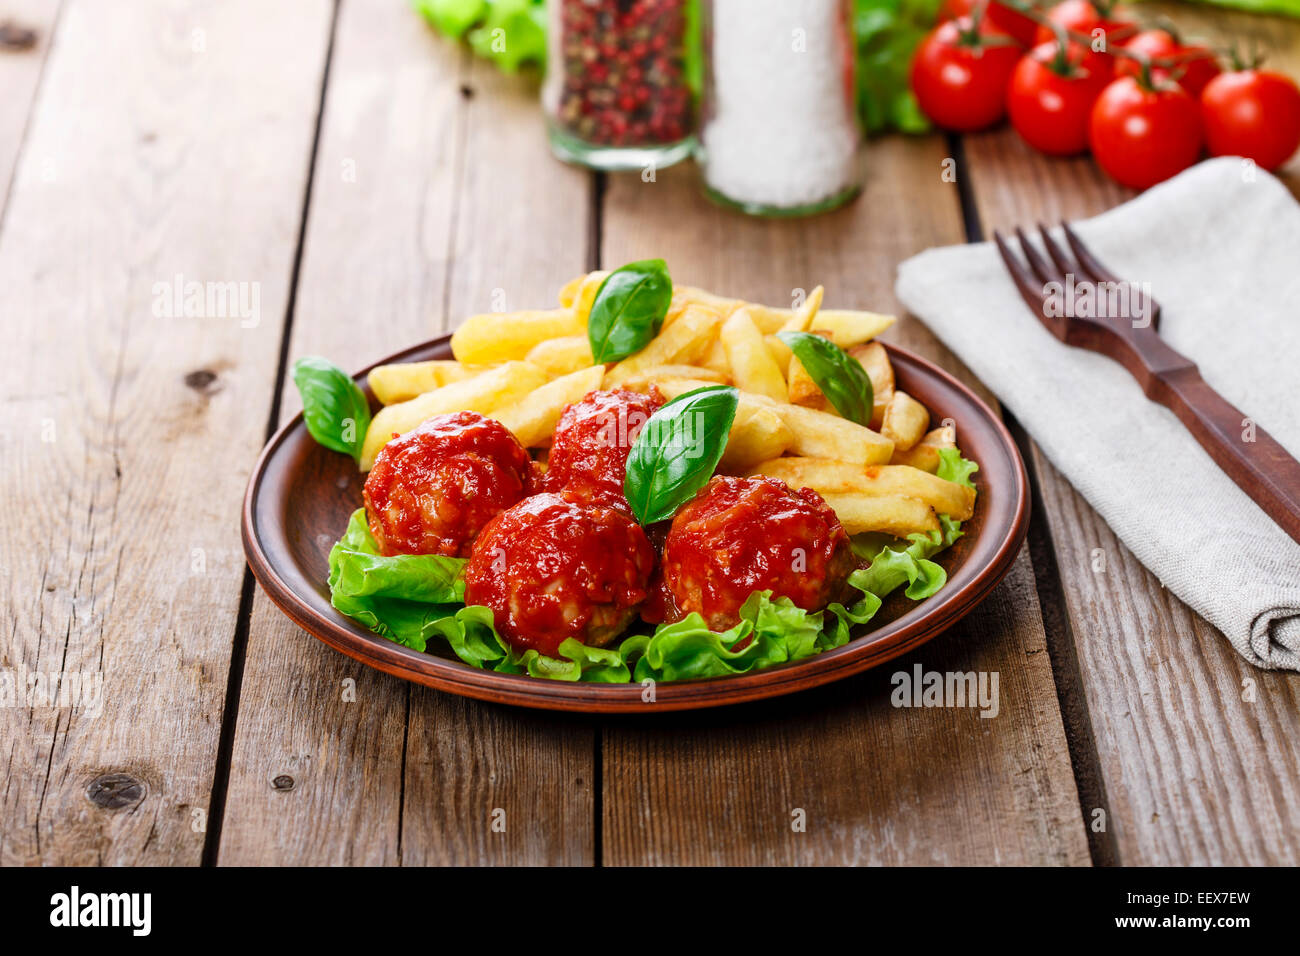 meatballs in tomato sauce with french fries Stock Photo